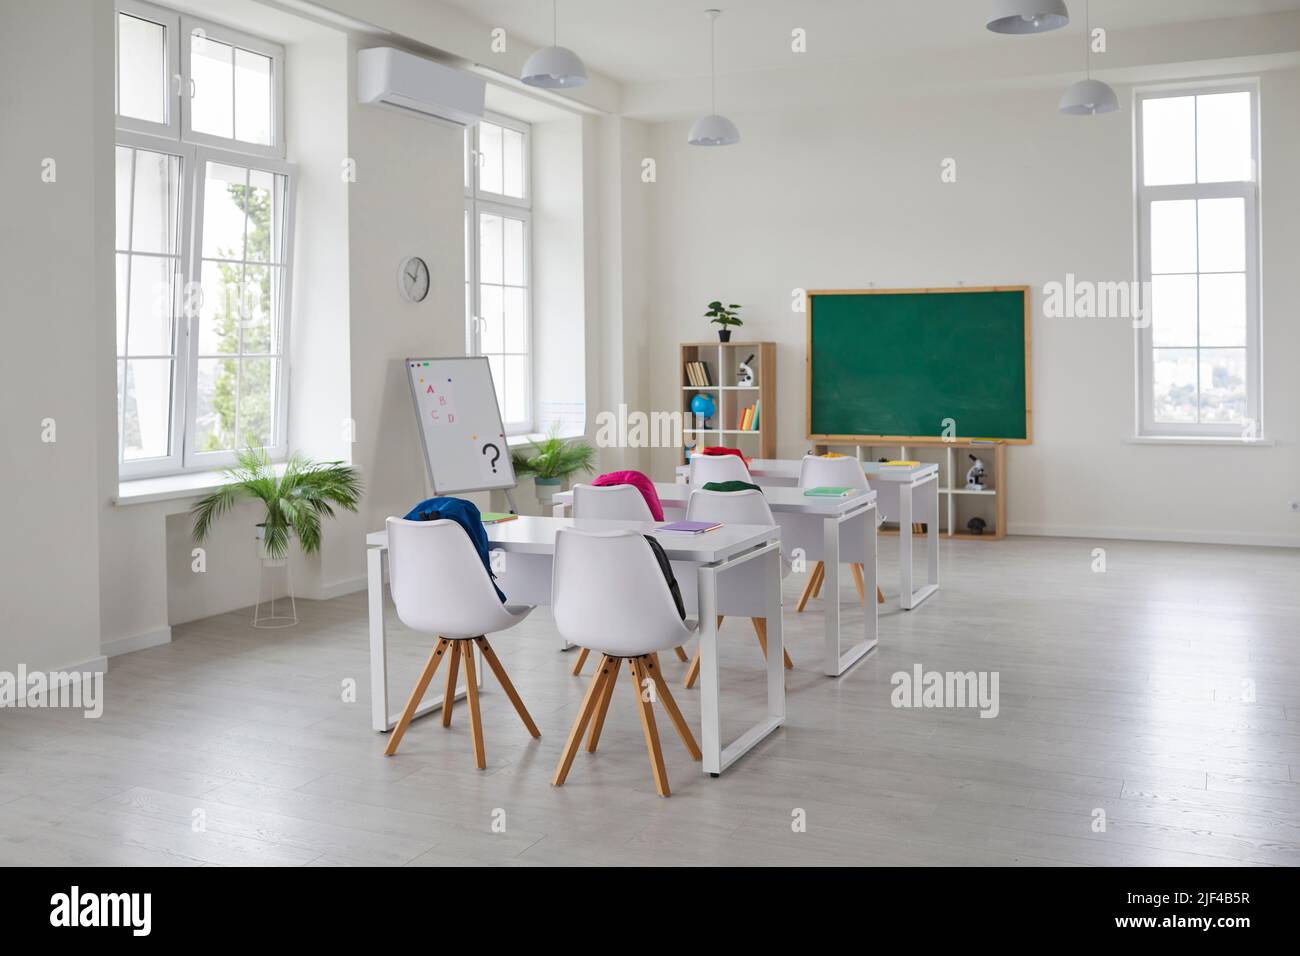 Interior of modern school classroom with desks, chairs, blackboard and whiteboard Stock Photo